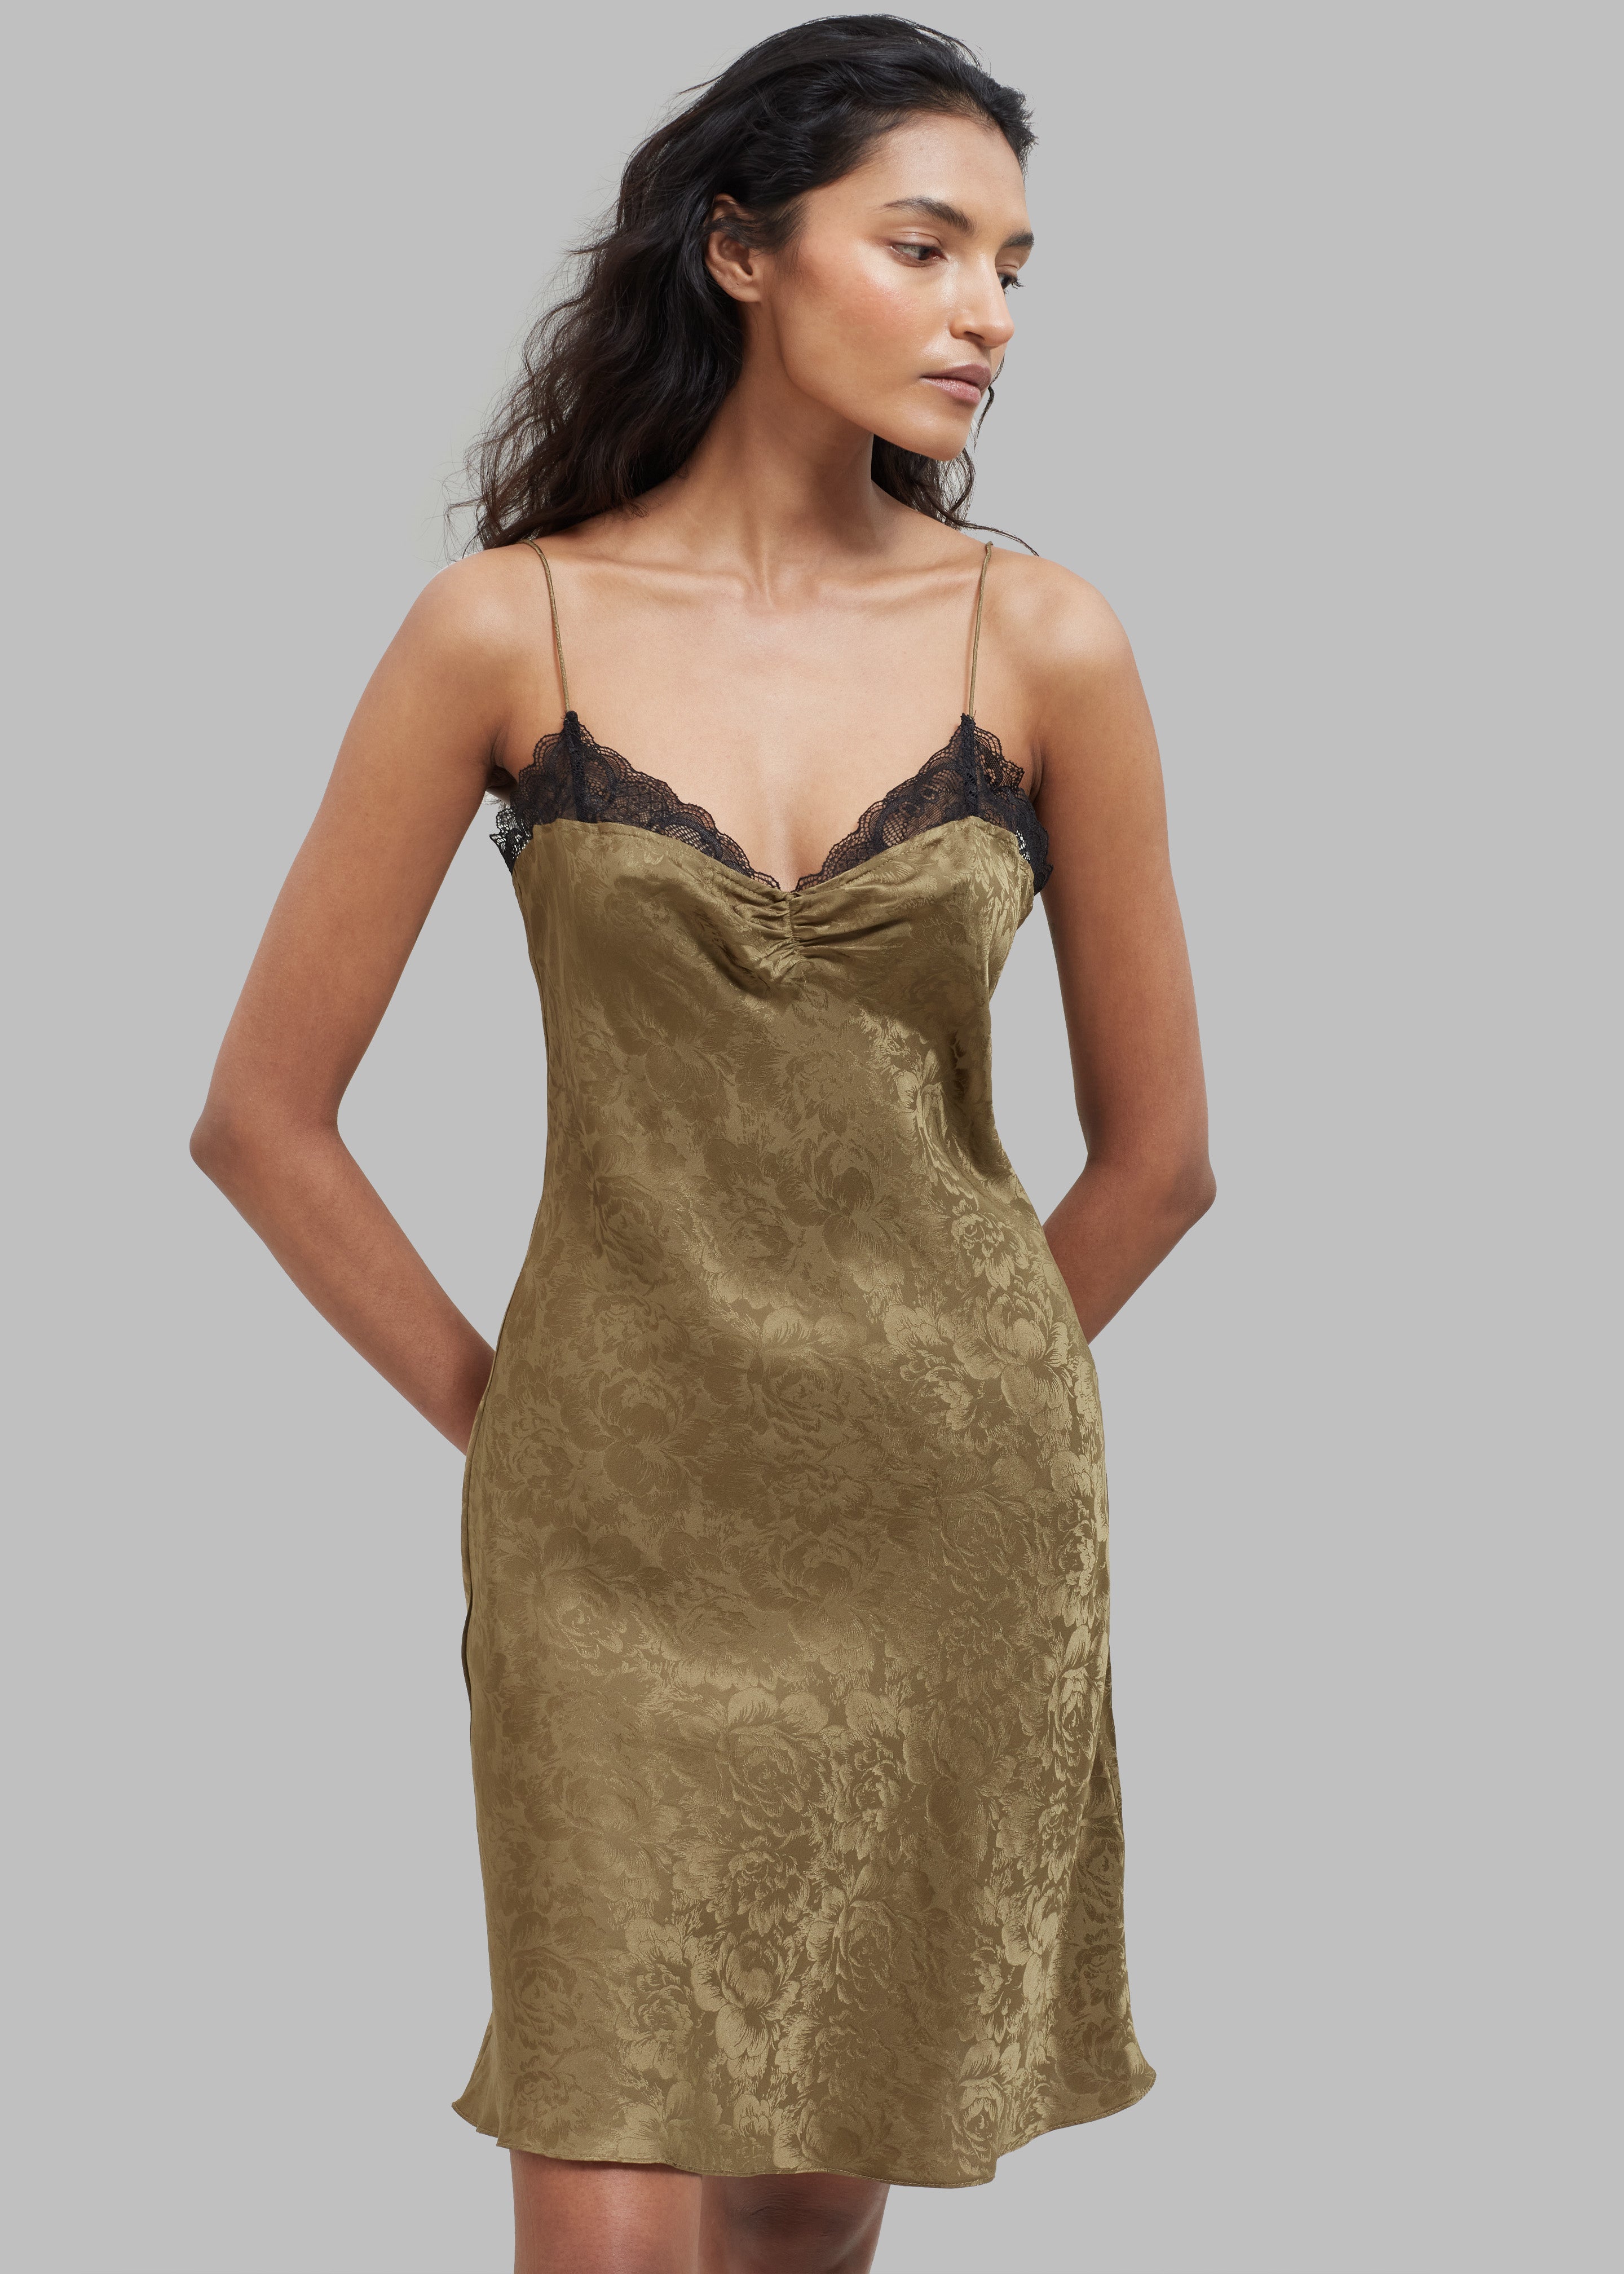 The Garment Toulouse Lace Dress - Olive with Black Lace - 4